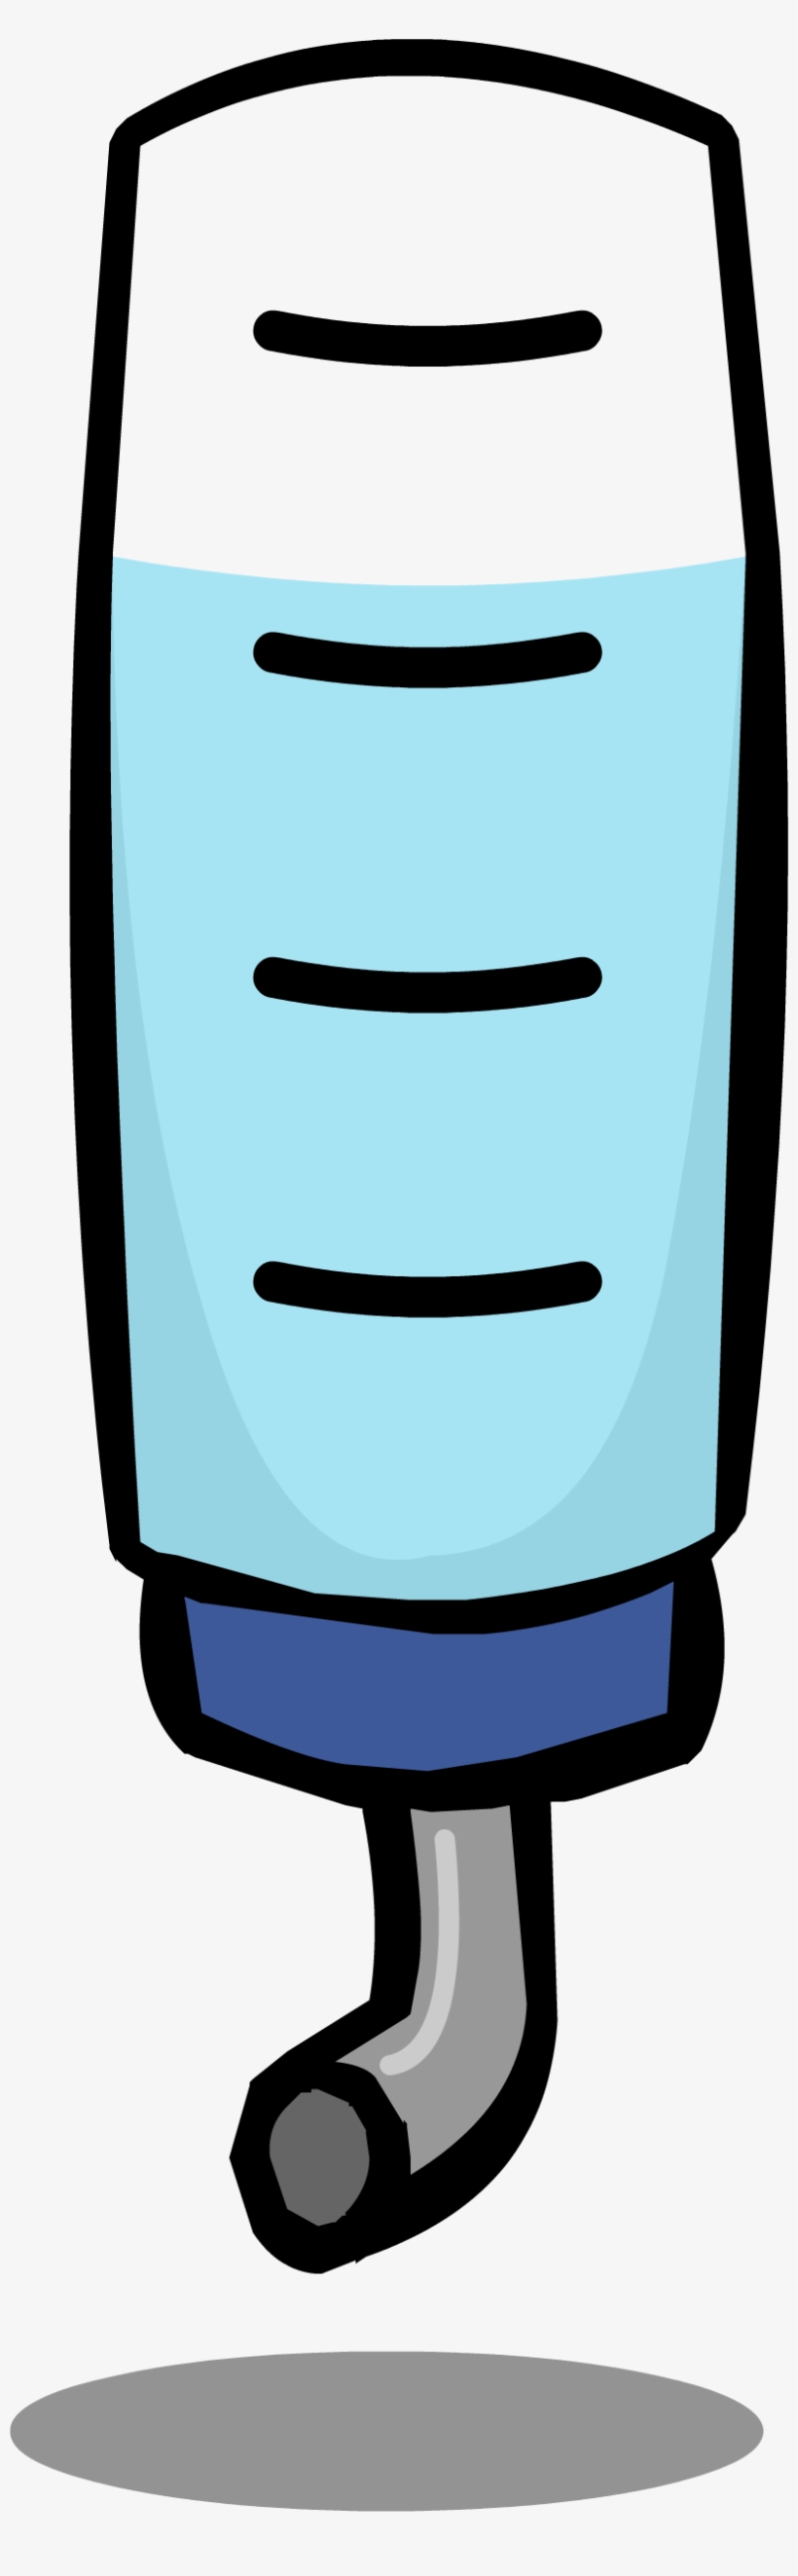 Water Bottle Sprite 001 - Water, transparent png #3996471